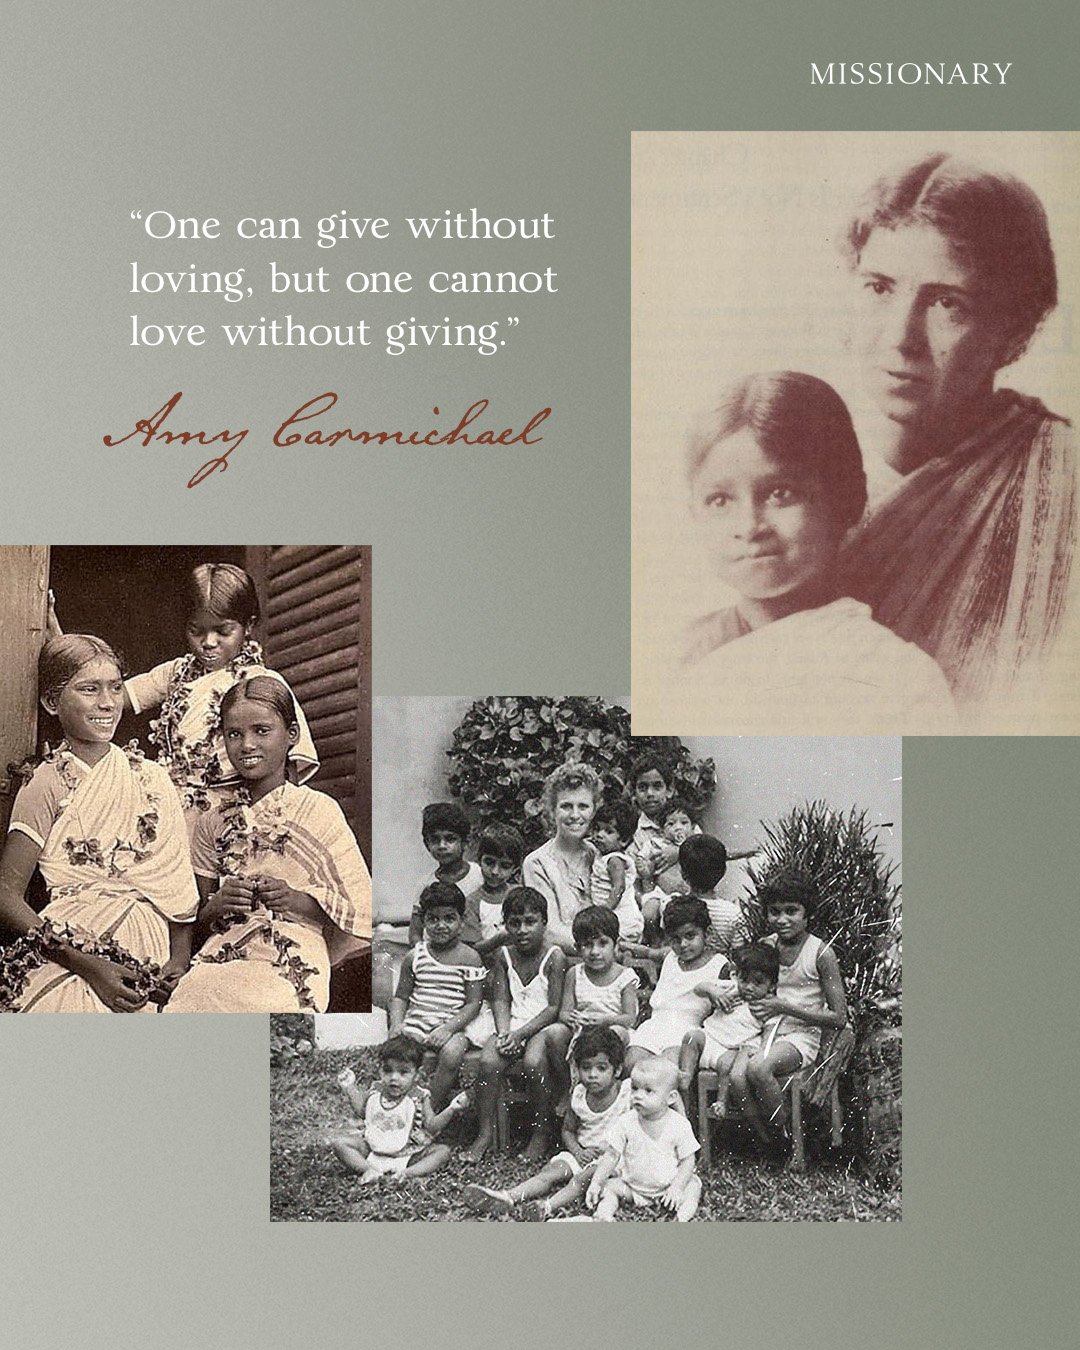 &quot;One can give without loving, but one cannot love without giving.&quot; &mdash; Amy Carmichael